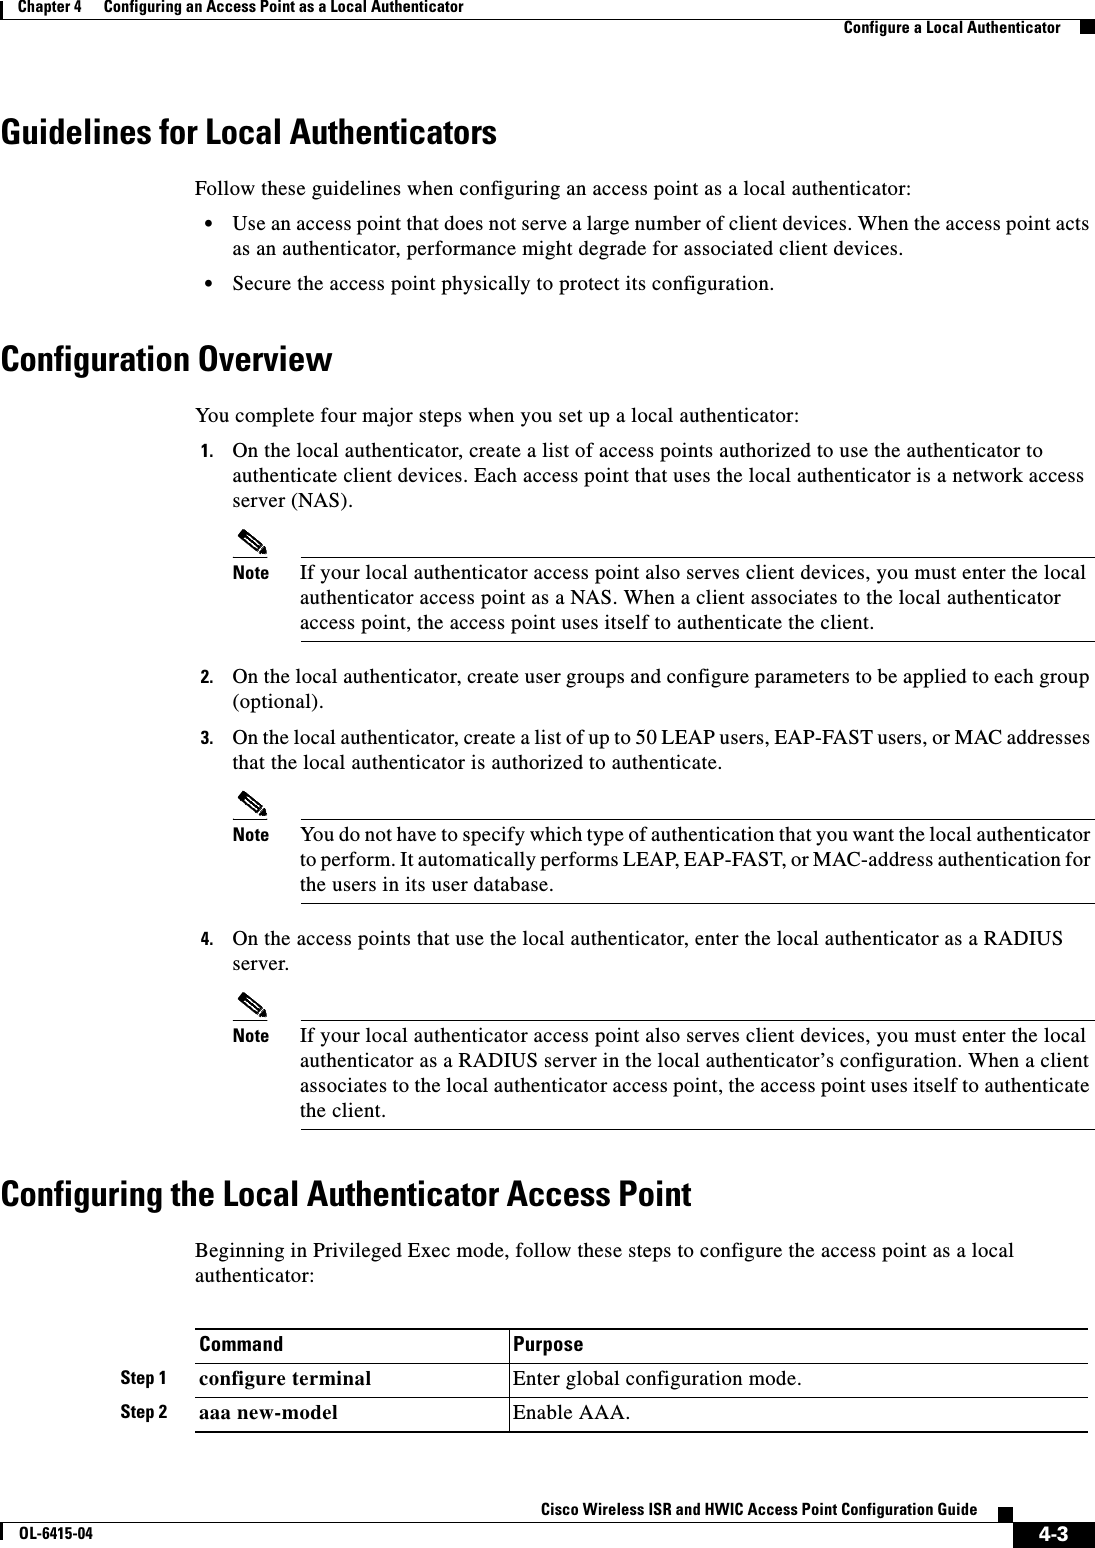  4-3Cisco Wireless ISR and HWIC Access Point Configuration GuideOL-6415-04Chapter 4      Configuring an Access Point as a Local Authenticator  Configure a Local AuthenticatorGuidelines for Local AuthenticatorsFollow these guidelines when configuring an access point as a local authenticator:  • Use an access point that does not serve a large number of client devices. When the access point acts as an authenticator, performance might degrade for associated client devices.   • Secure the access point physically to protect its configuration.Configuration OverviewYou complete four major steps when you set up a local authenticator:1. On the local authenticator, create a list of access points authorized to use the authenticator to authenticate client devices. Each access point that uses the local authenticator is a network access server (NAS).Note If your local authenticator access point also serves client devices, you must enter the local authenticator access point as a NAS. When a client associates to the local authenticator access point, the access point uses itself to authenticate the client.2. On the local authenticator, create user groups and configure parameters to be applied to each group (optional).3. On the local authenticator, create a list of up to 50 LEAP users, EAP-FAST users, or MAC addresses that the local authenticator is authorized to authenticate.Note You do not have to specify which type of authentication that you want the local authenticator to perform. It automatically performs LEAP, EAP-FAST, or MAC-address authentication for the users in its user database.4. On the access points that use the local authenticator, enter the local authenticator as a RADIUS server.Note If your local authenticator access point also serves client devices, you must enter the local authenticator as a RADIUS server in the local authenticator’s configuration. When a client associates to the local authenticator access point, the access point uses itself to authenticate the client.Configuring the Local Authenticator Access PointBeginning in Privileged Exec mode, follow these steps to configure the access point as a local authenticator:Command PurposeStep 1 configure terminal Enter global configuration mode.Step 2 aaa new-model Enable AAA.